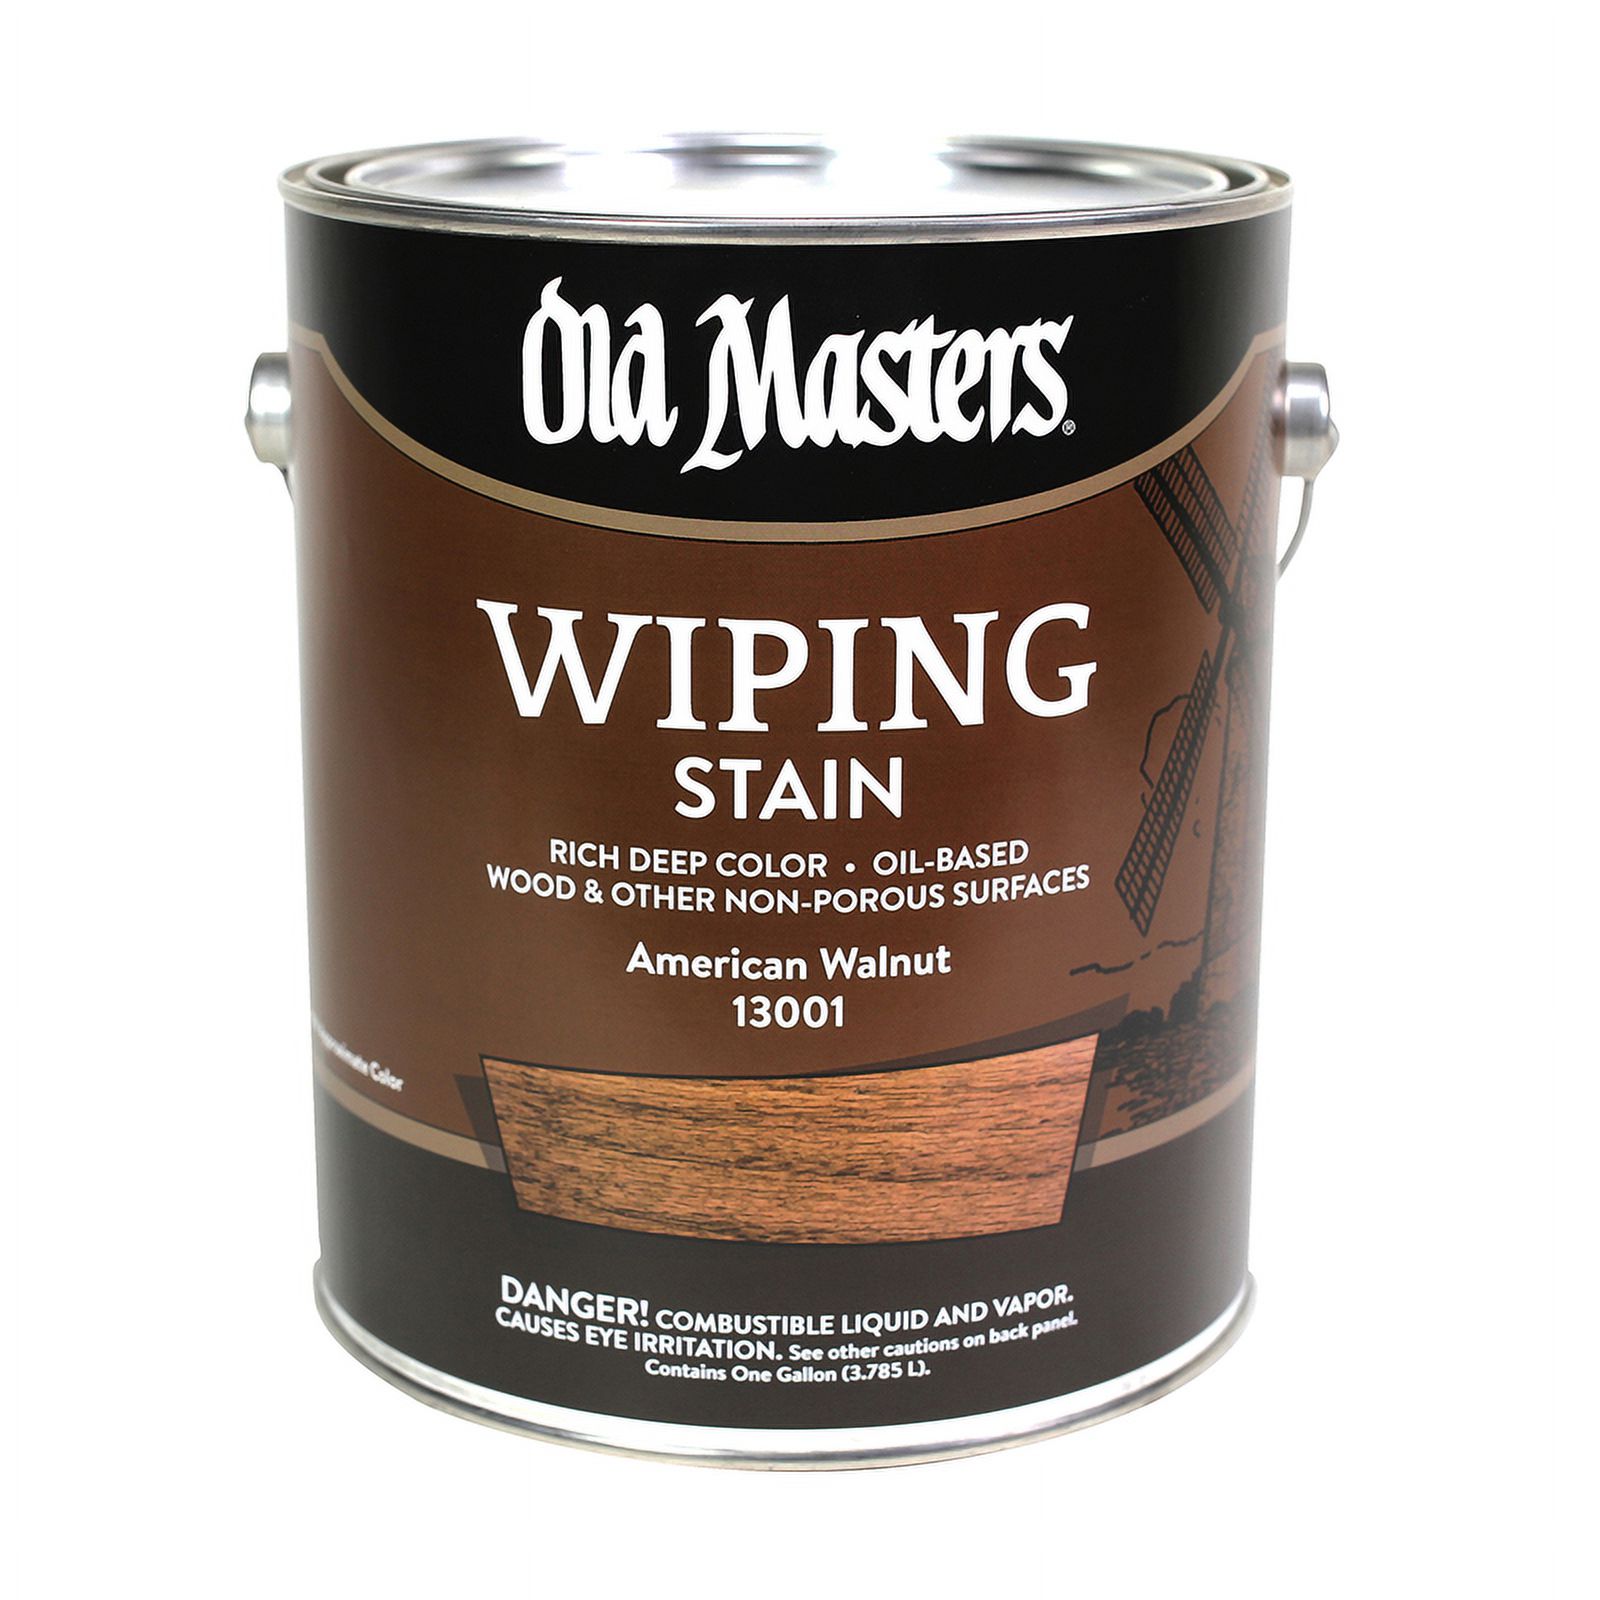 Old Masters Semi-Transparent American Walnut Oil-Based Wiping Stain 1 gal - image 2 of 3